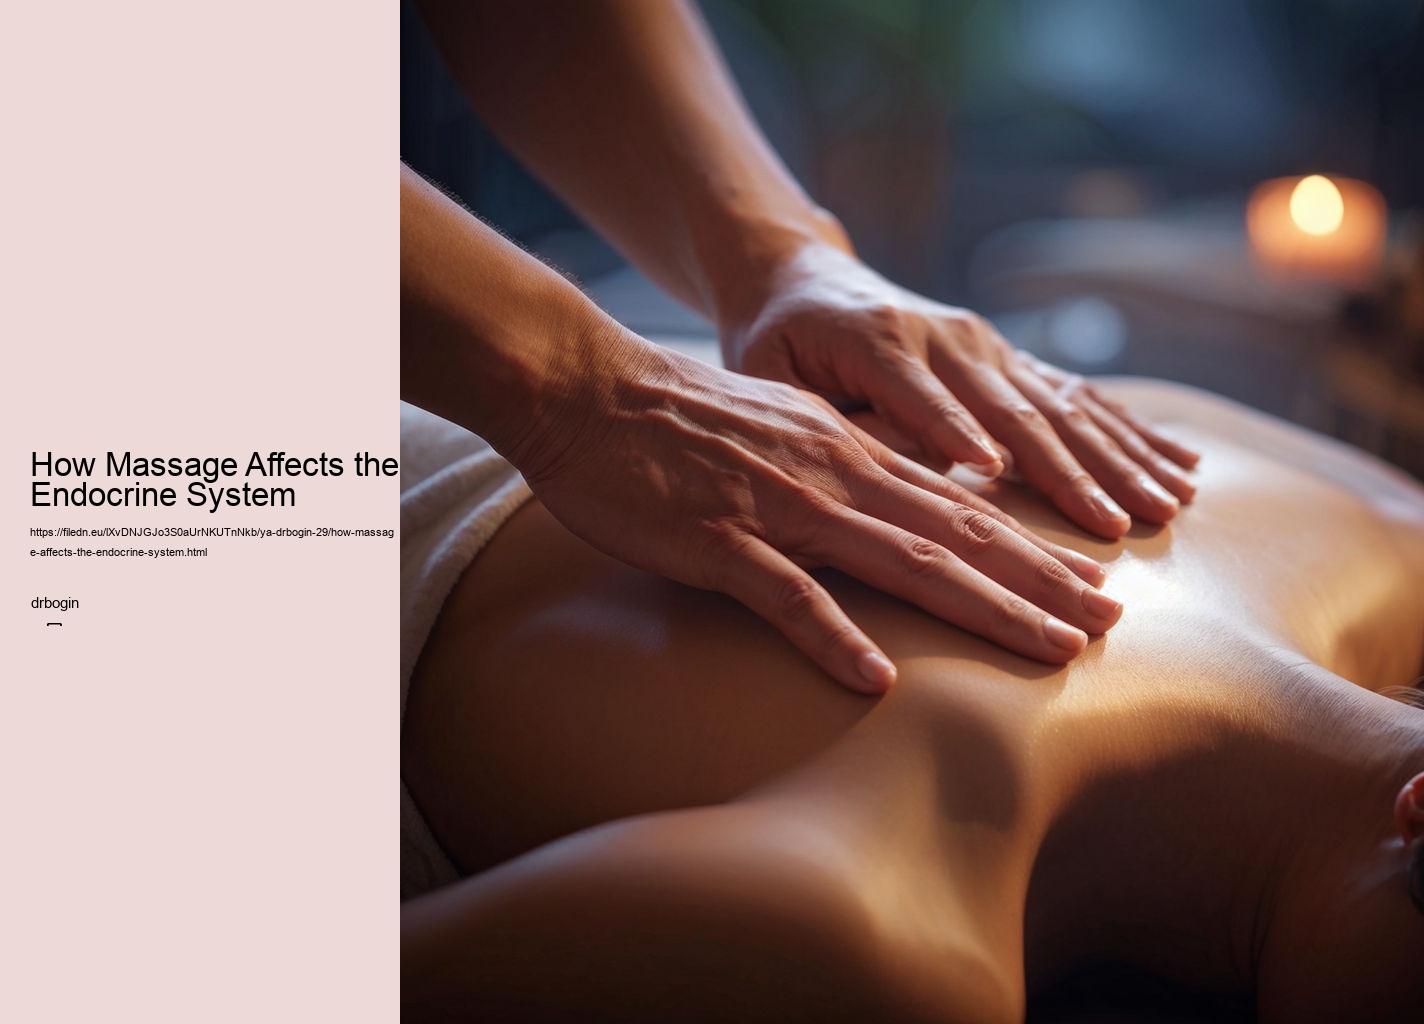 How Massage Affects the Endocrine System